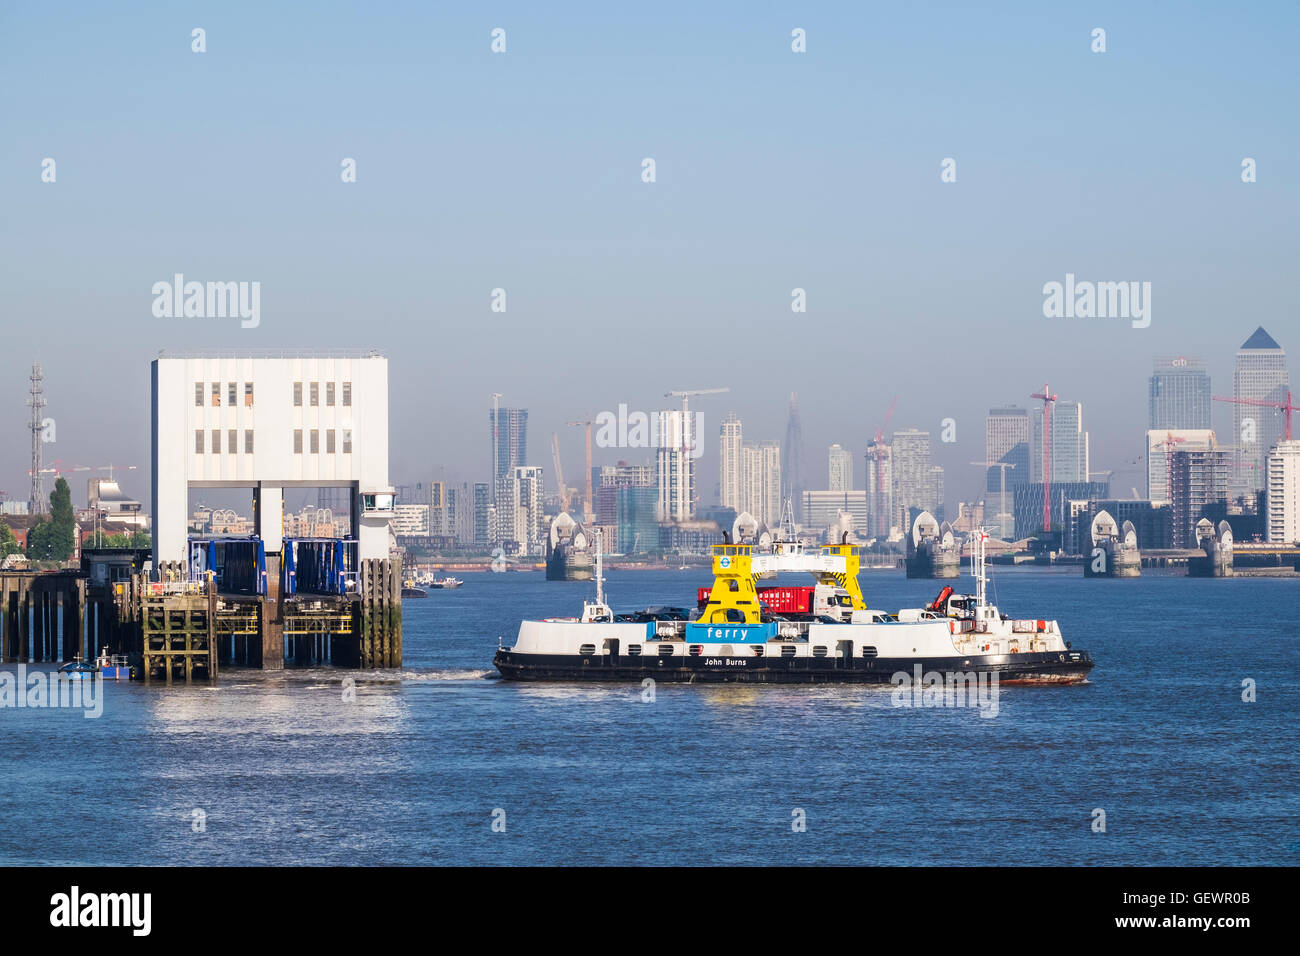 Woolwich Ferry, Tamise, Londres, Angleterre, Royaume-Uni Banque D'Images